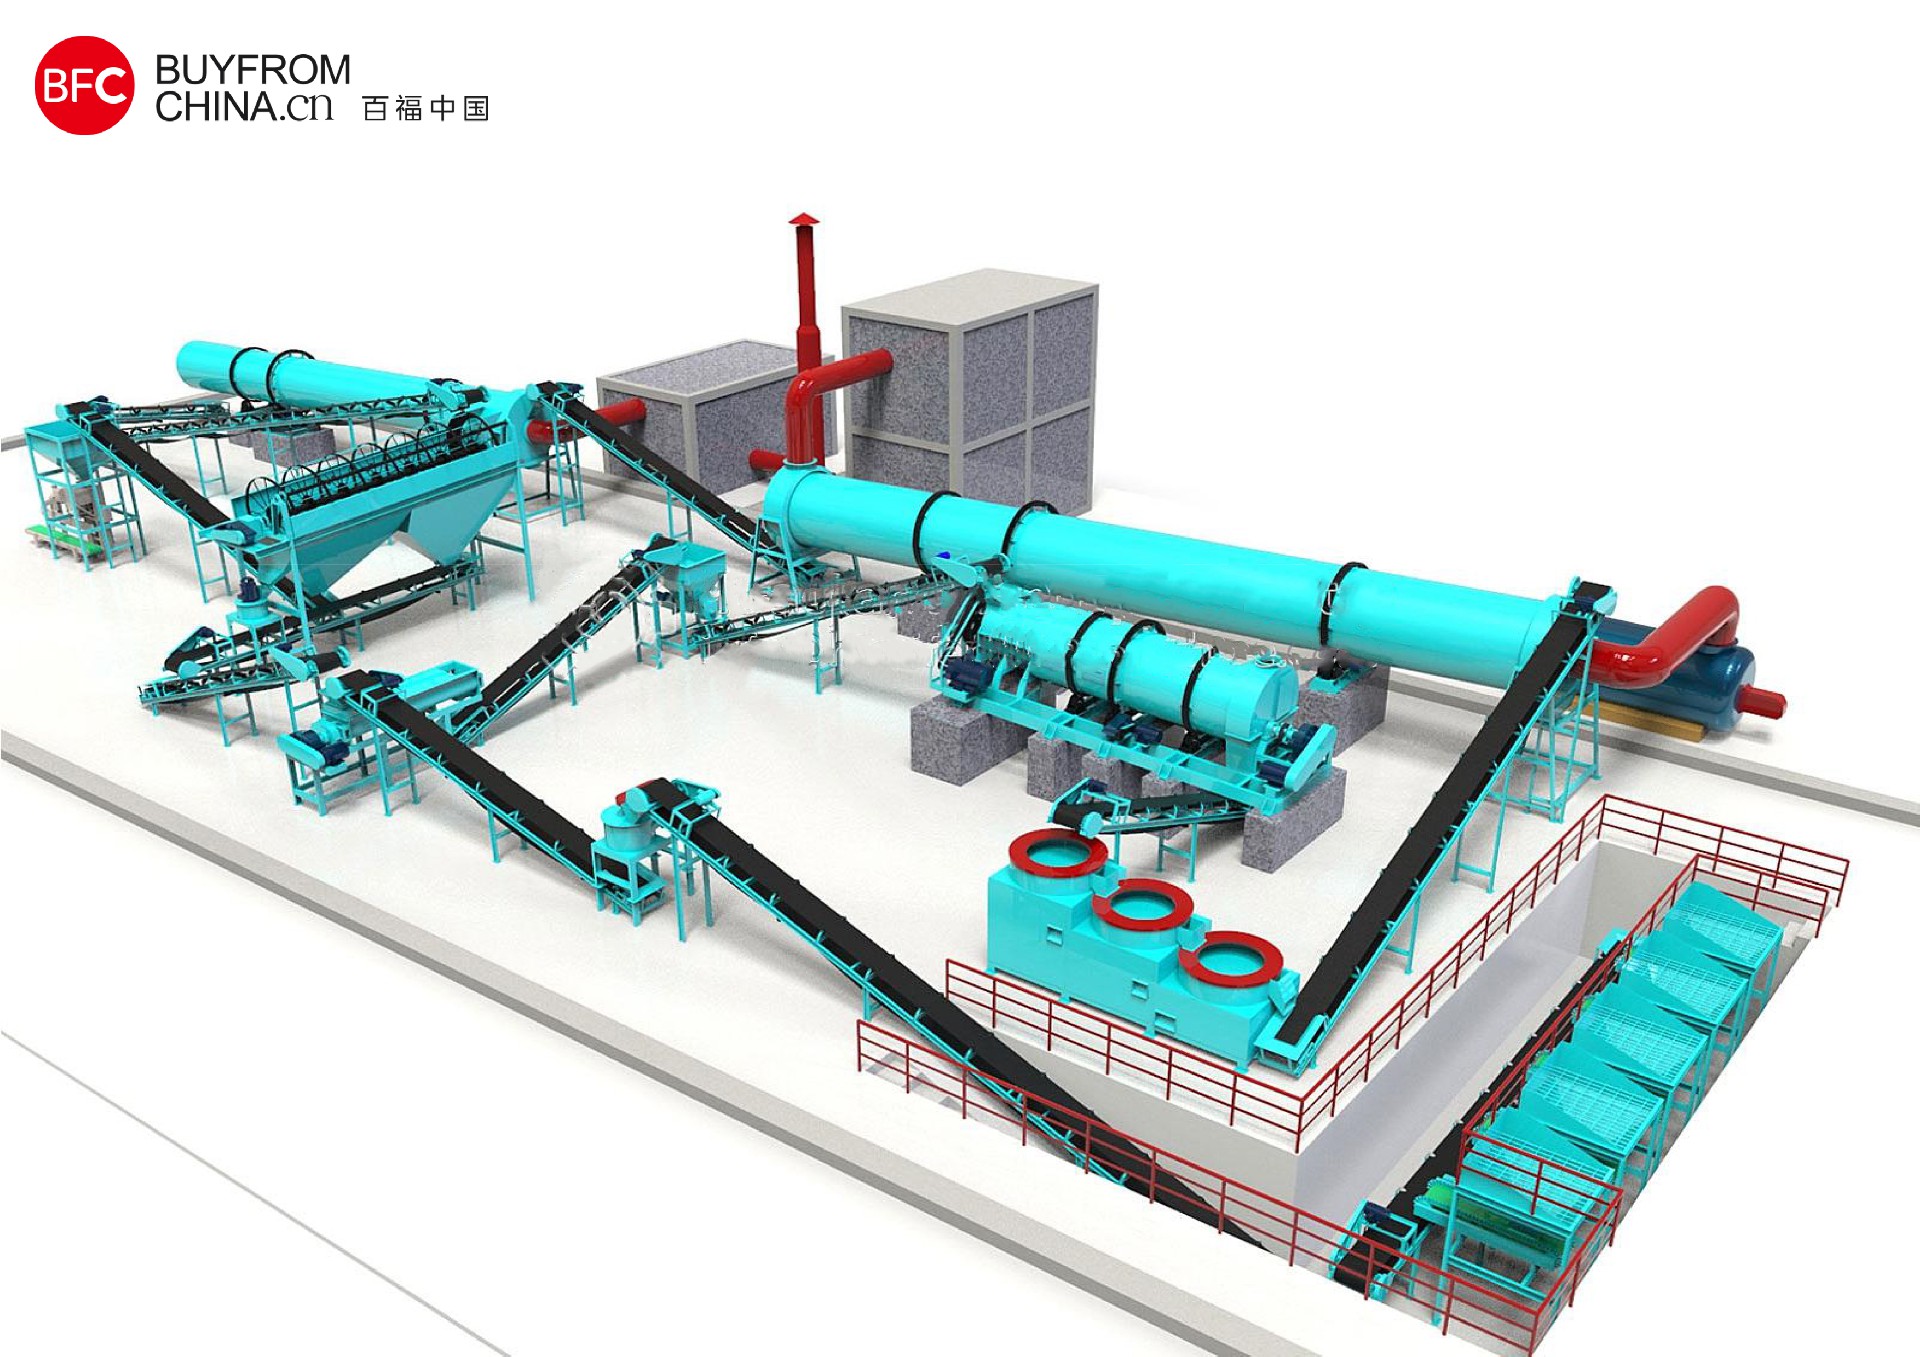 One of the chicken manure organic fertilizer granulation production lines